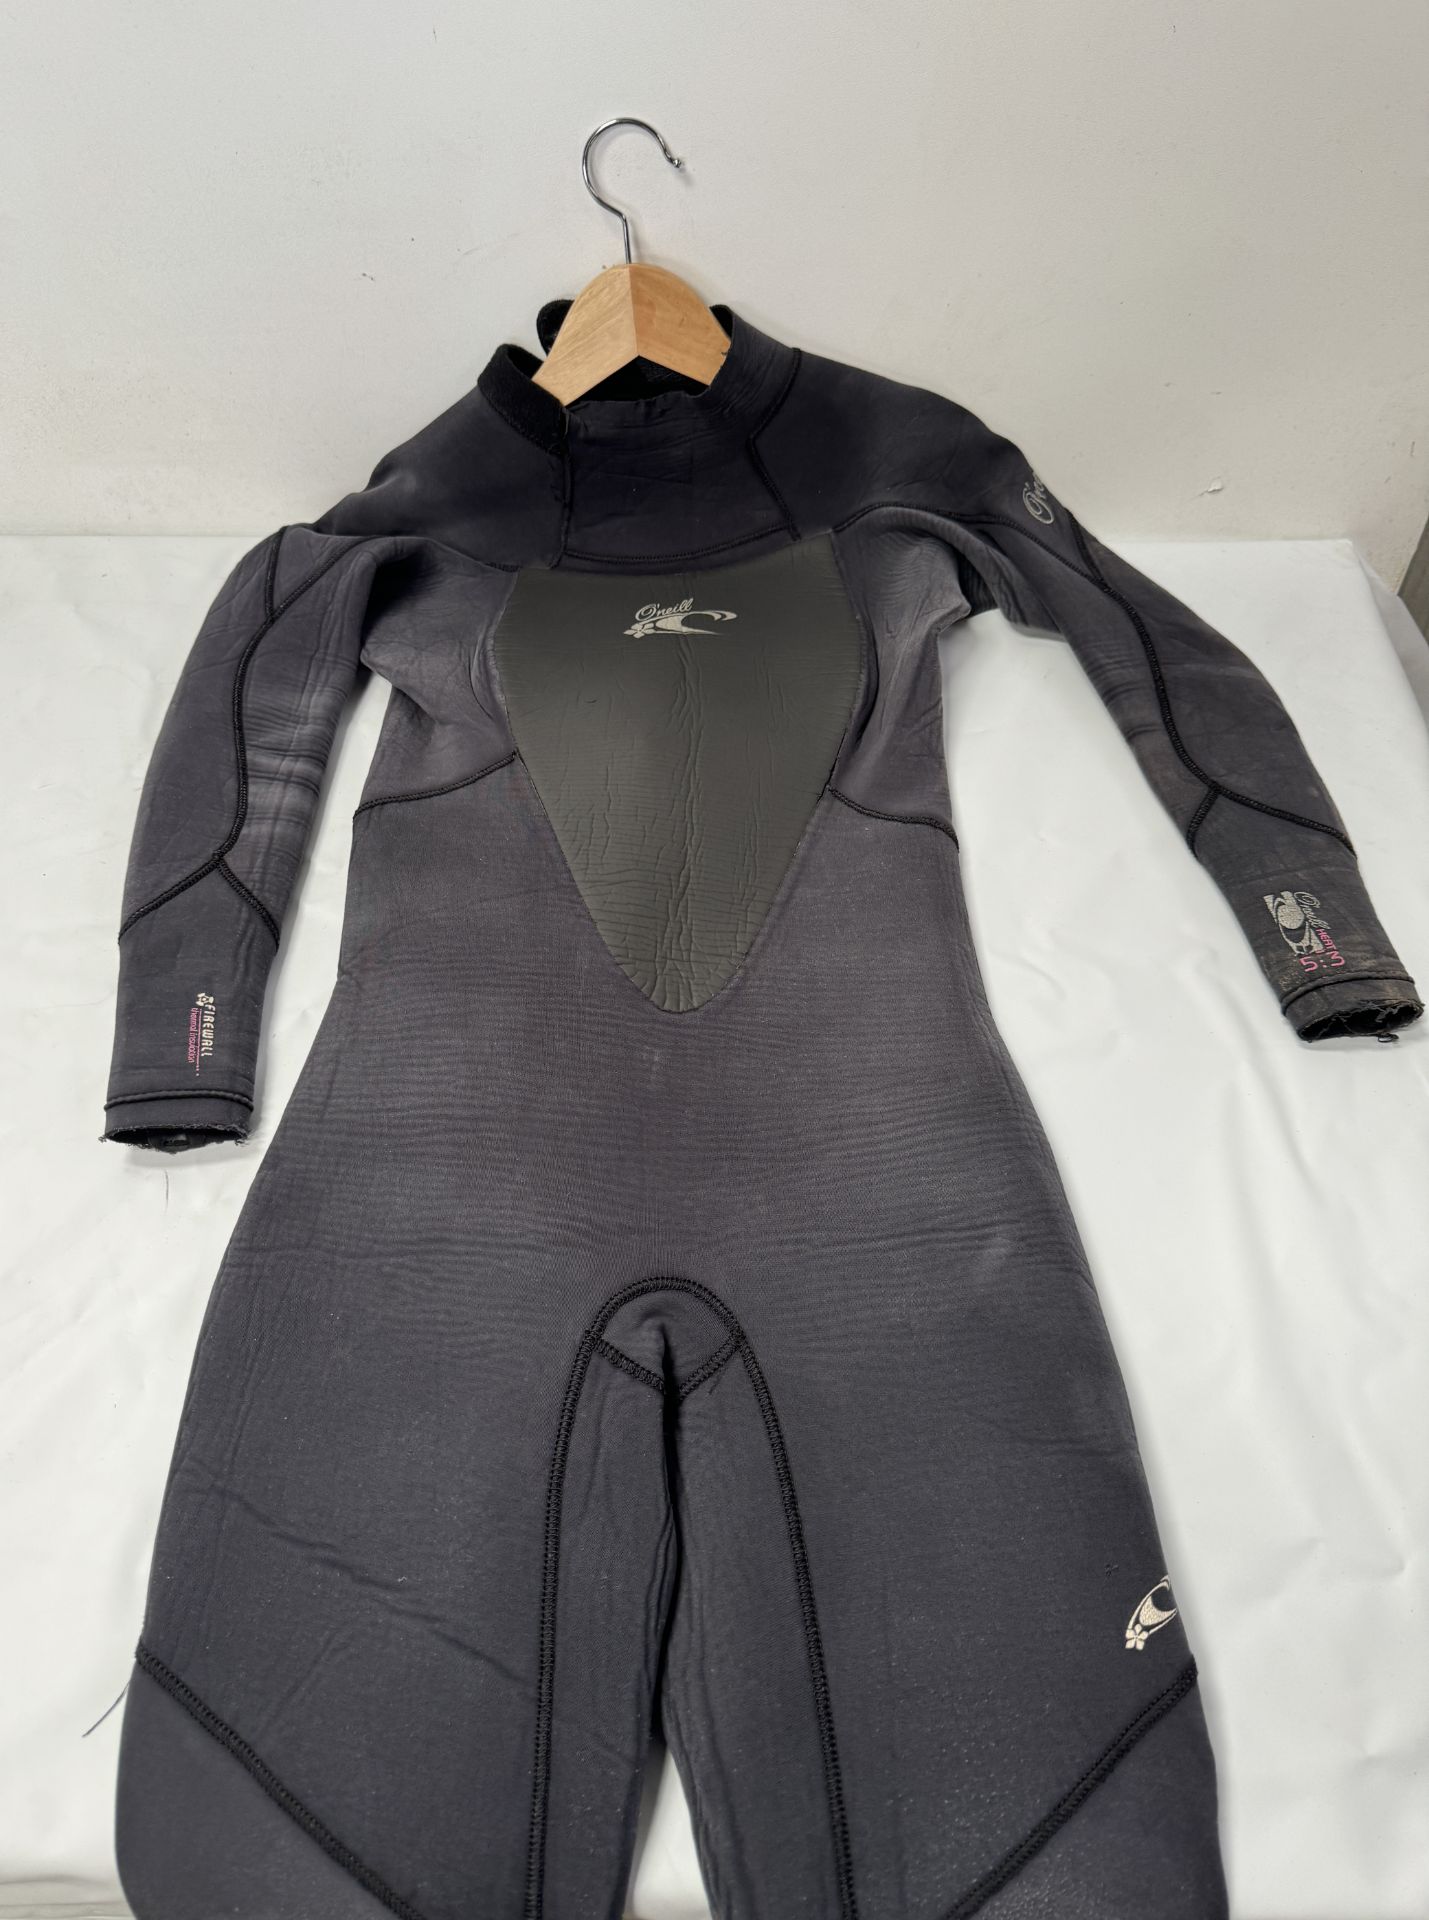 Six O’Neill, Beuchat, Seac Wetsuits (Location: Brentwood. Please Refer to General Notes) - Image 9 of 18